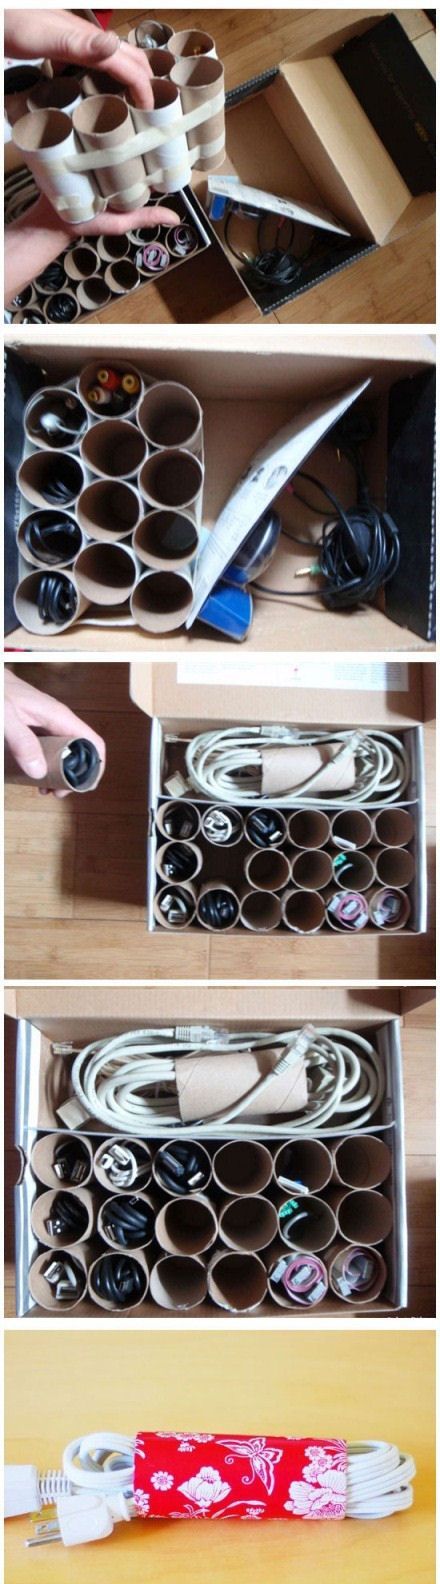 DIY Toilet Paper Roll Organizer for Your Cords. 